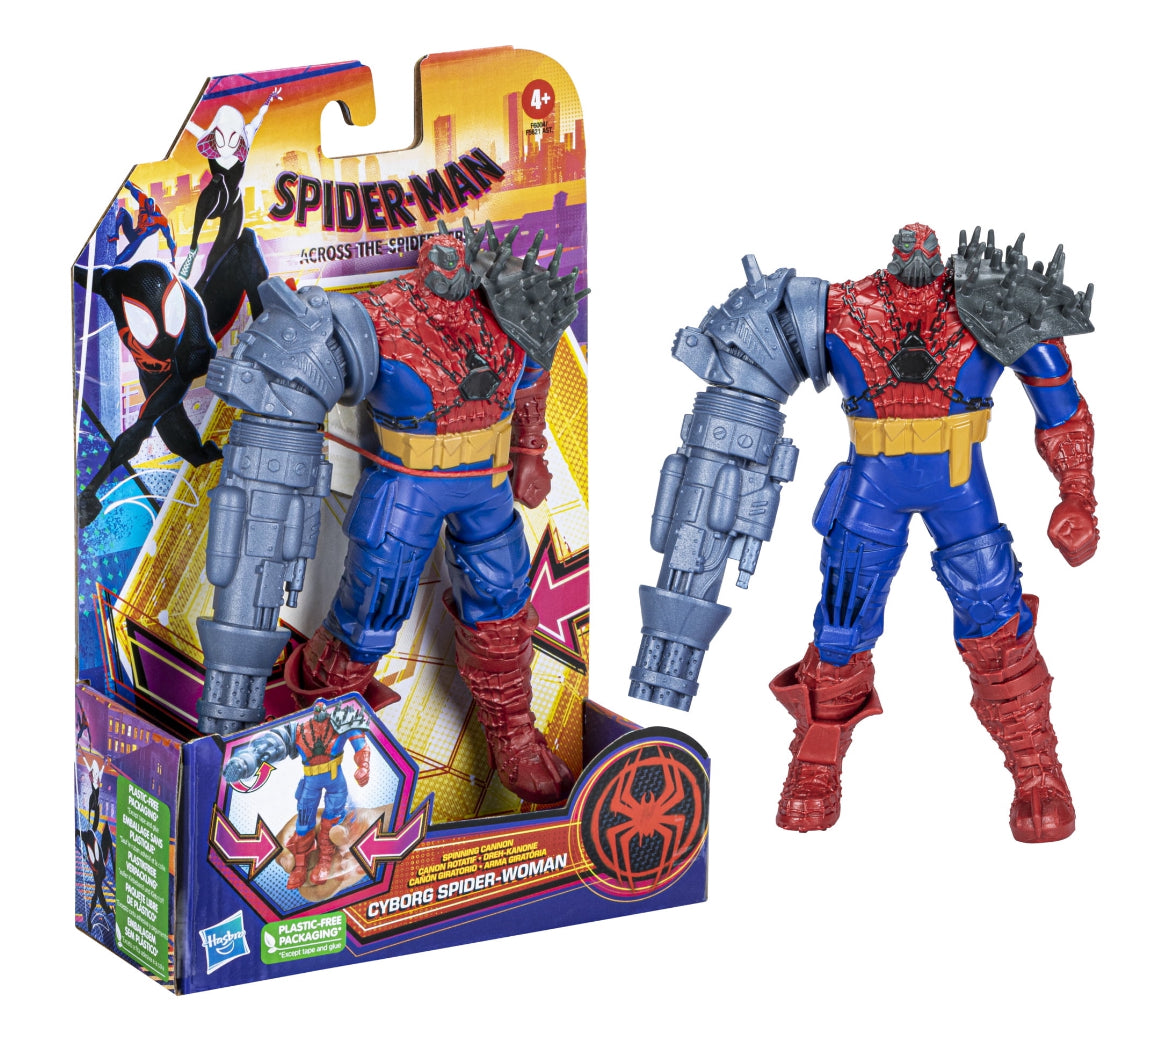 Marvel Spider-Man: Across the Spider-Verse Cyborg Spider-Woman Action Figure 113490